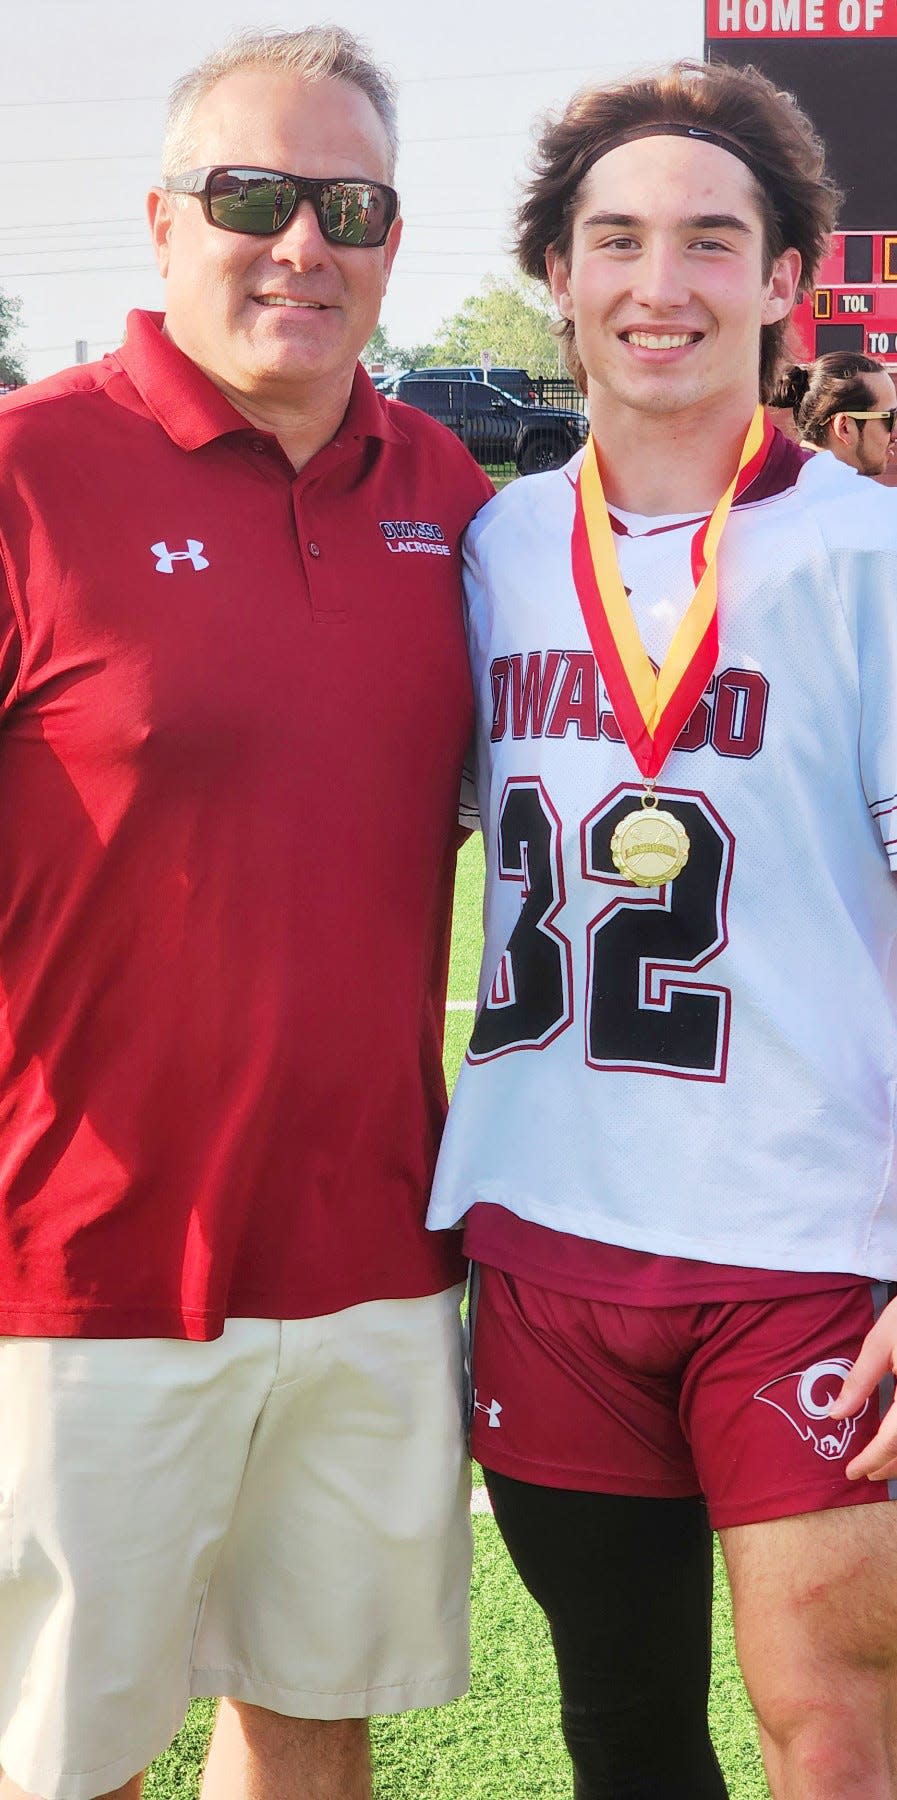 Ron McGill, left, poses with his son Duke McGill after McGill helped the Owasso Lacrosse Club team win the state title.